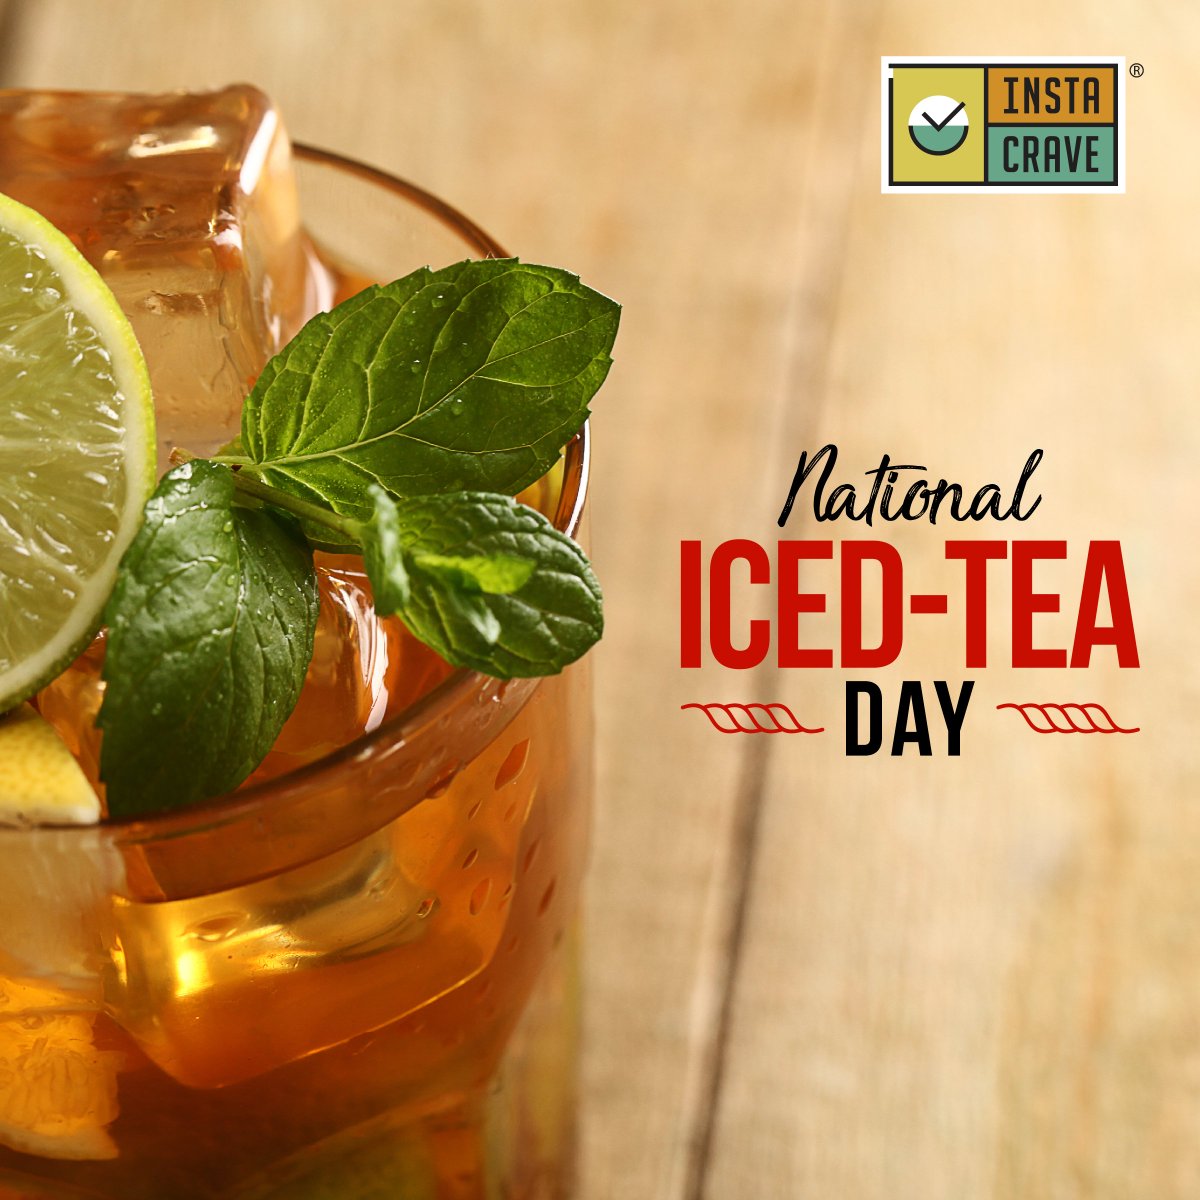 The most awesome way to beat the heat is by enjoying a glass of iced tea to get some cool and also some good taste. Happy National Iced tea day to you 😍😍 . . . #instacrave #nationalicedtea #icetea #icetea🌱 #icedtea #icedteatime #icedteaseason #icedteaday